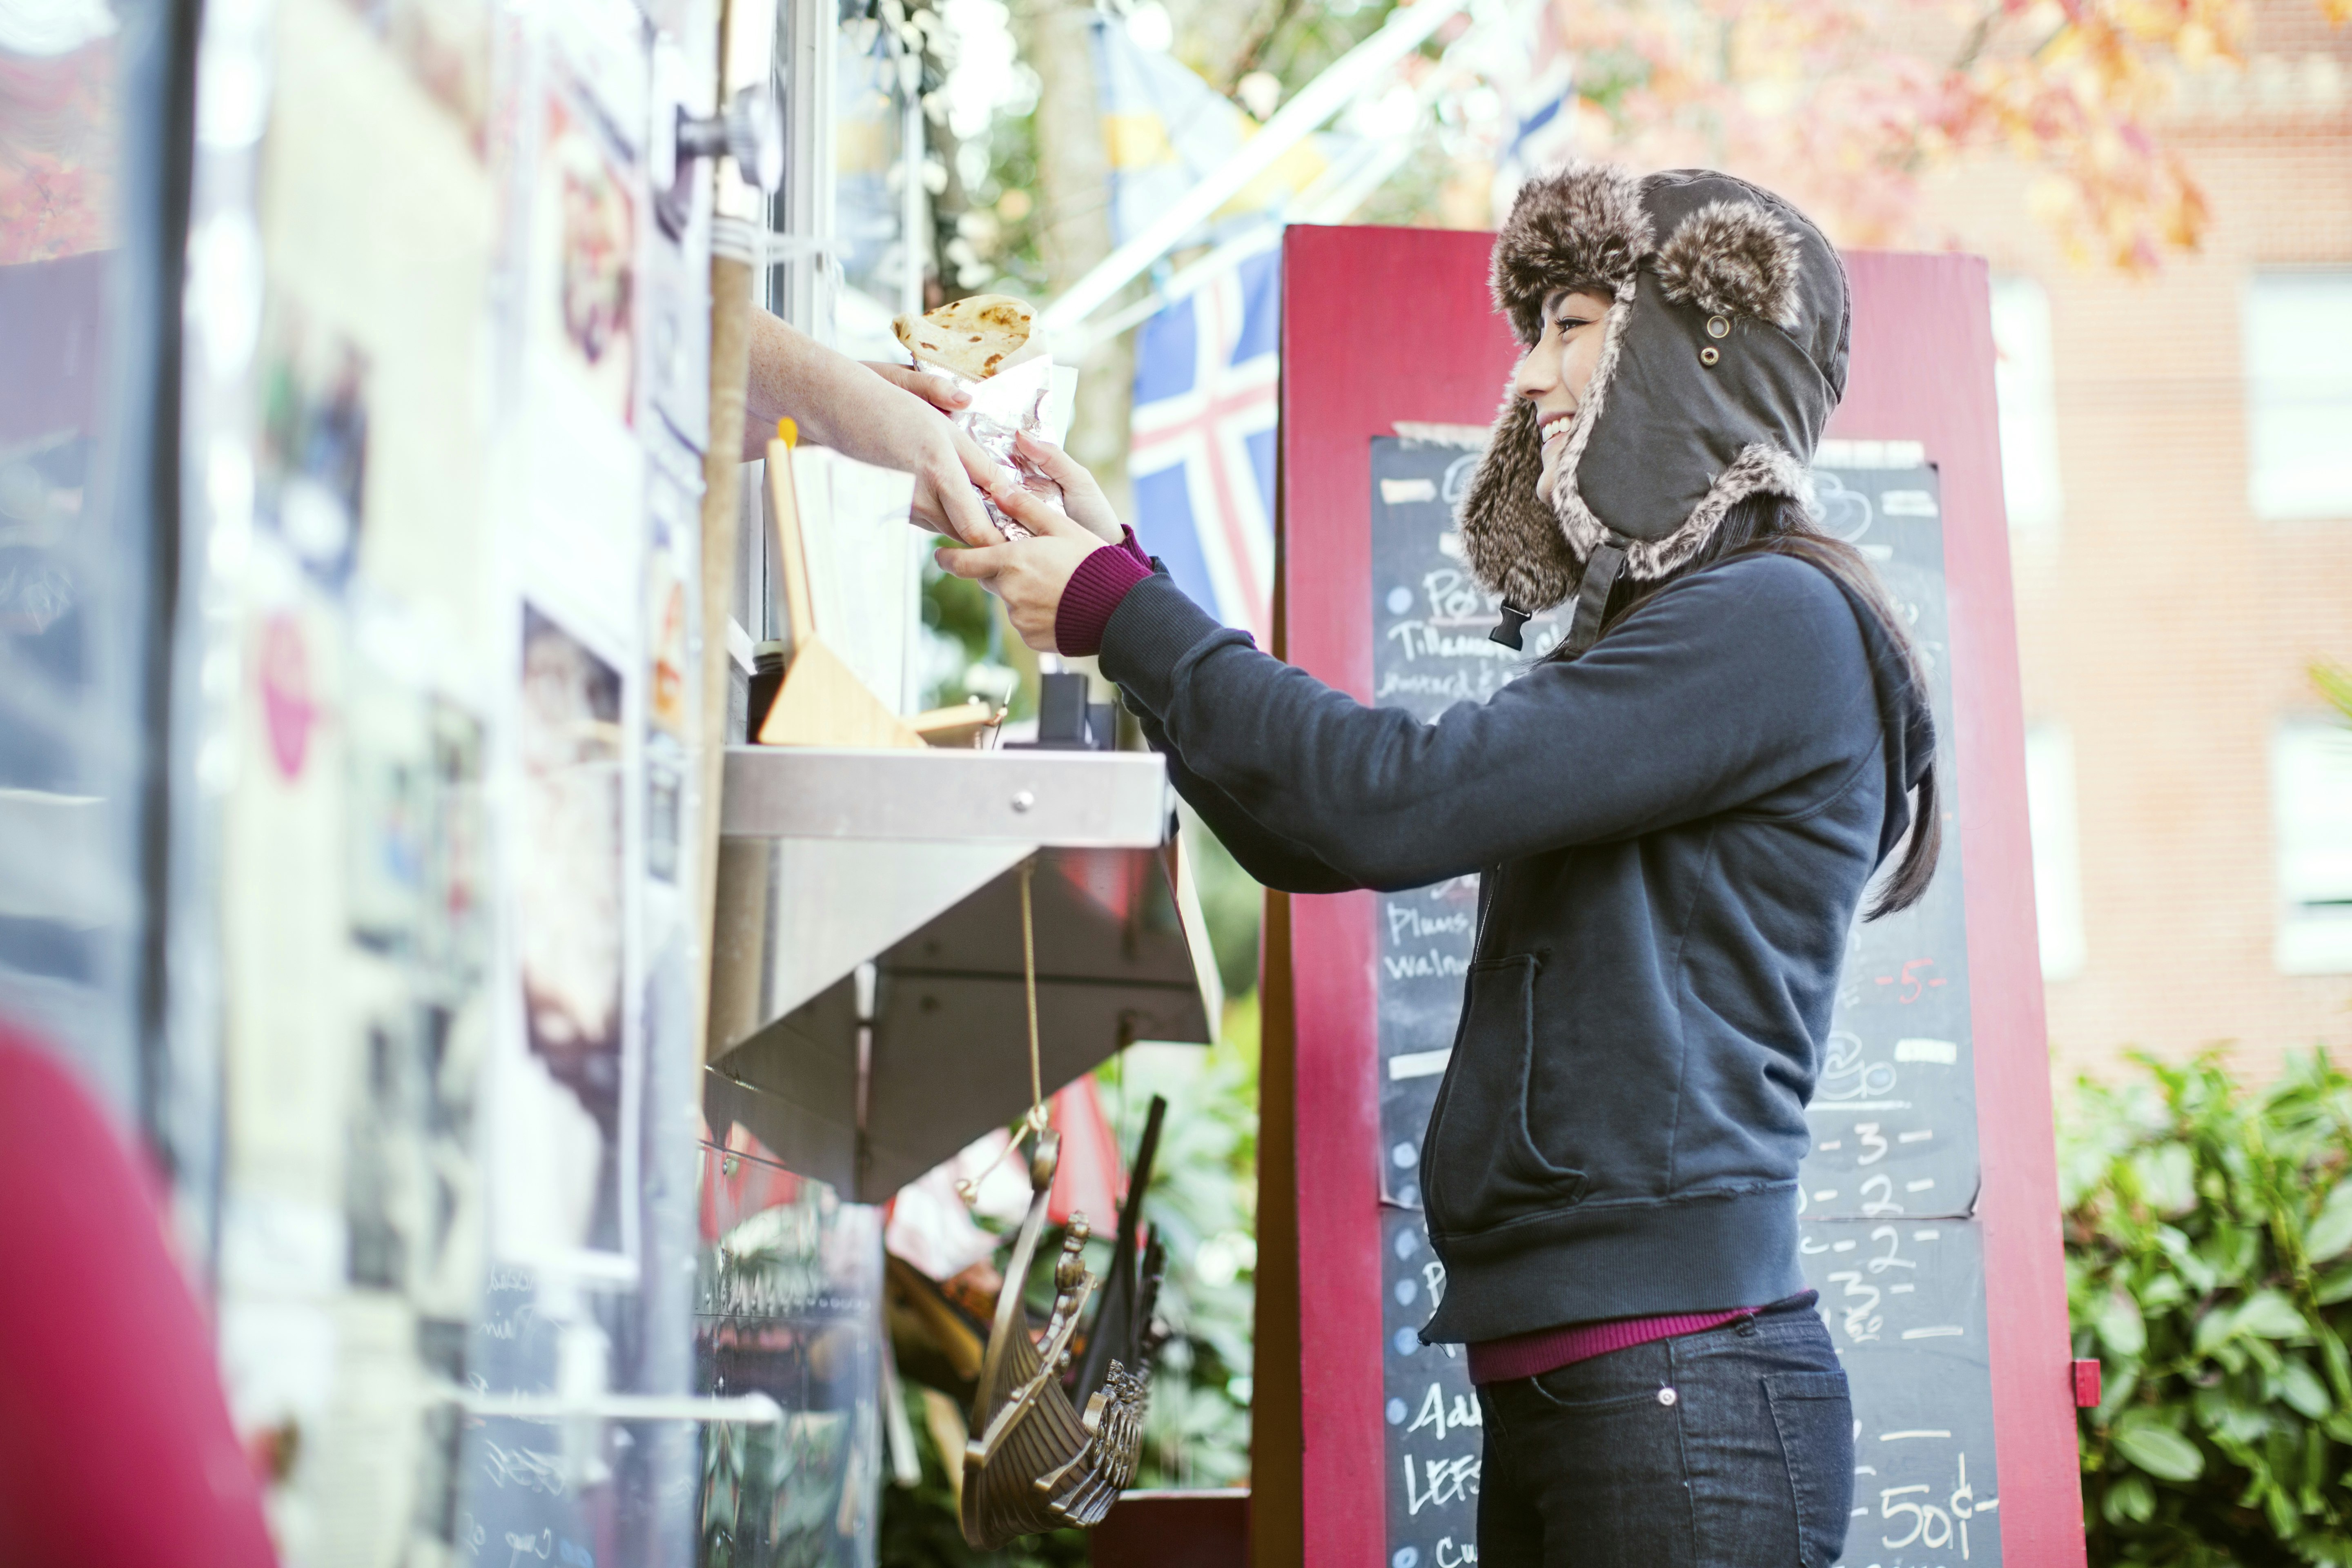 A side view of a woman ordering food from a metallic food truck in Portland.